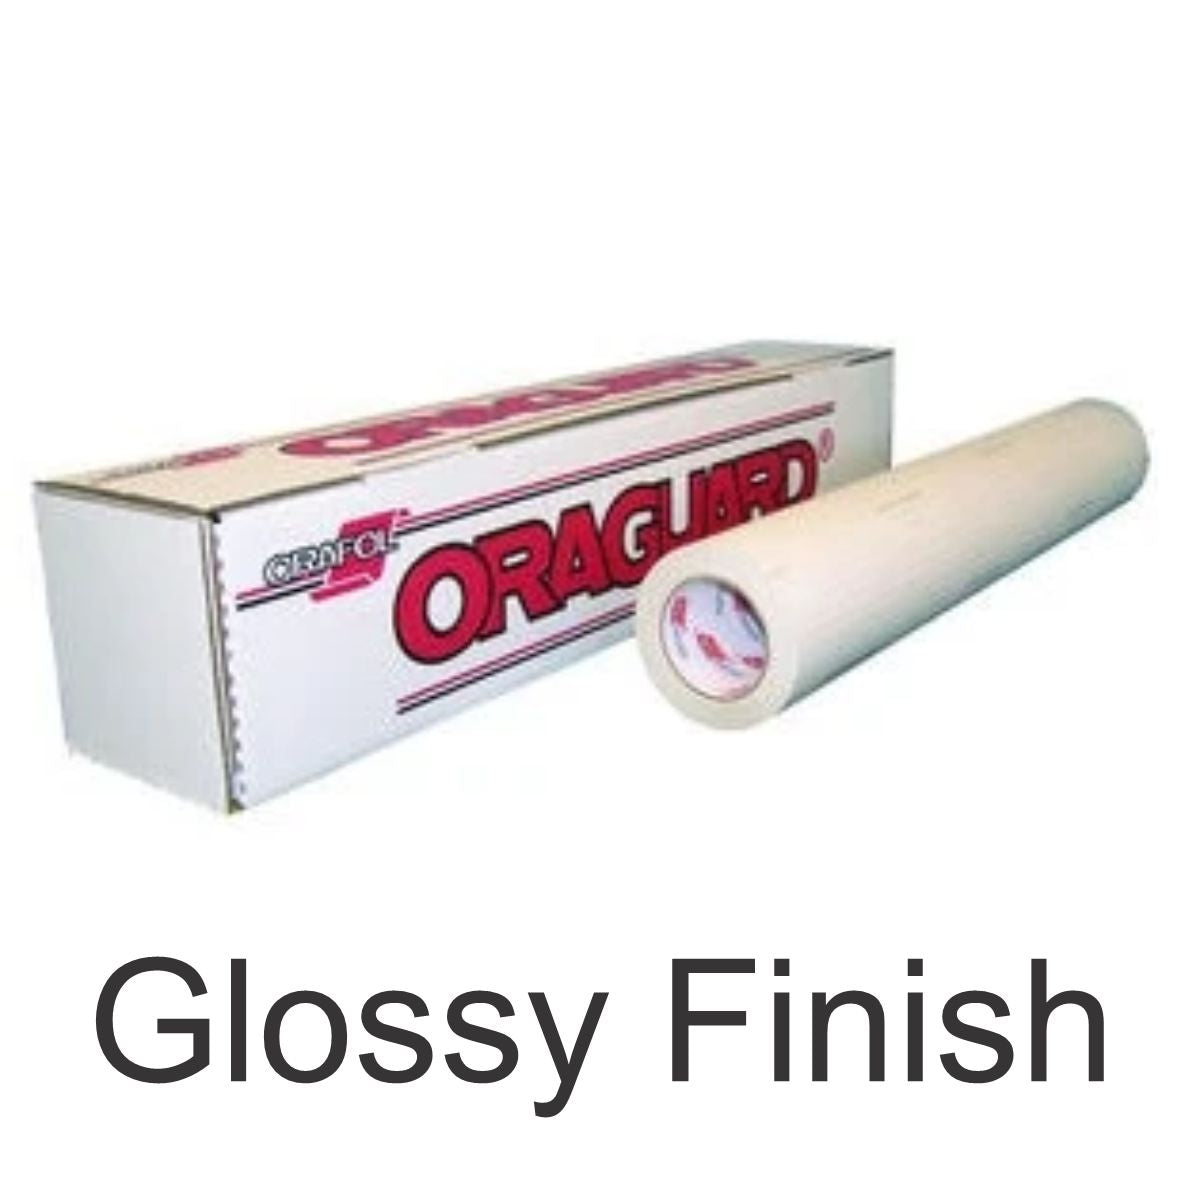 Oraguard 210 (For Cold Lamination) Gloss Finish Choose Your Length